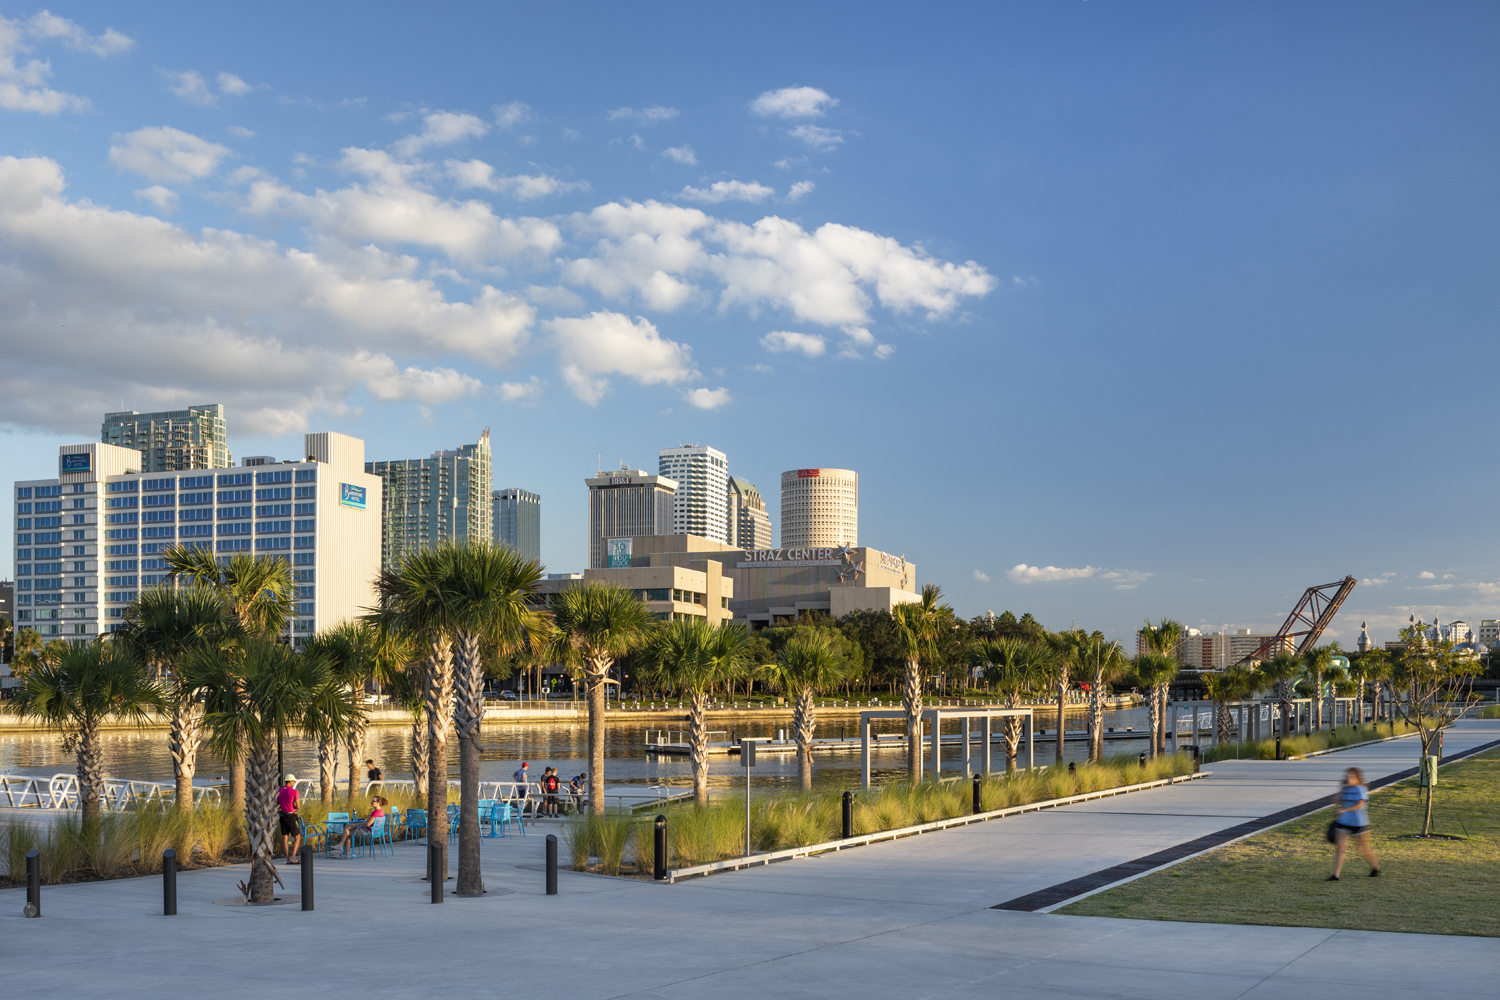 Julian B. Lane Riverfront Park helps unite the city of Tampa around the Hillsborough River including the palm tree-lined promenade designed by Civitas with skyline views offering clear sense of place.